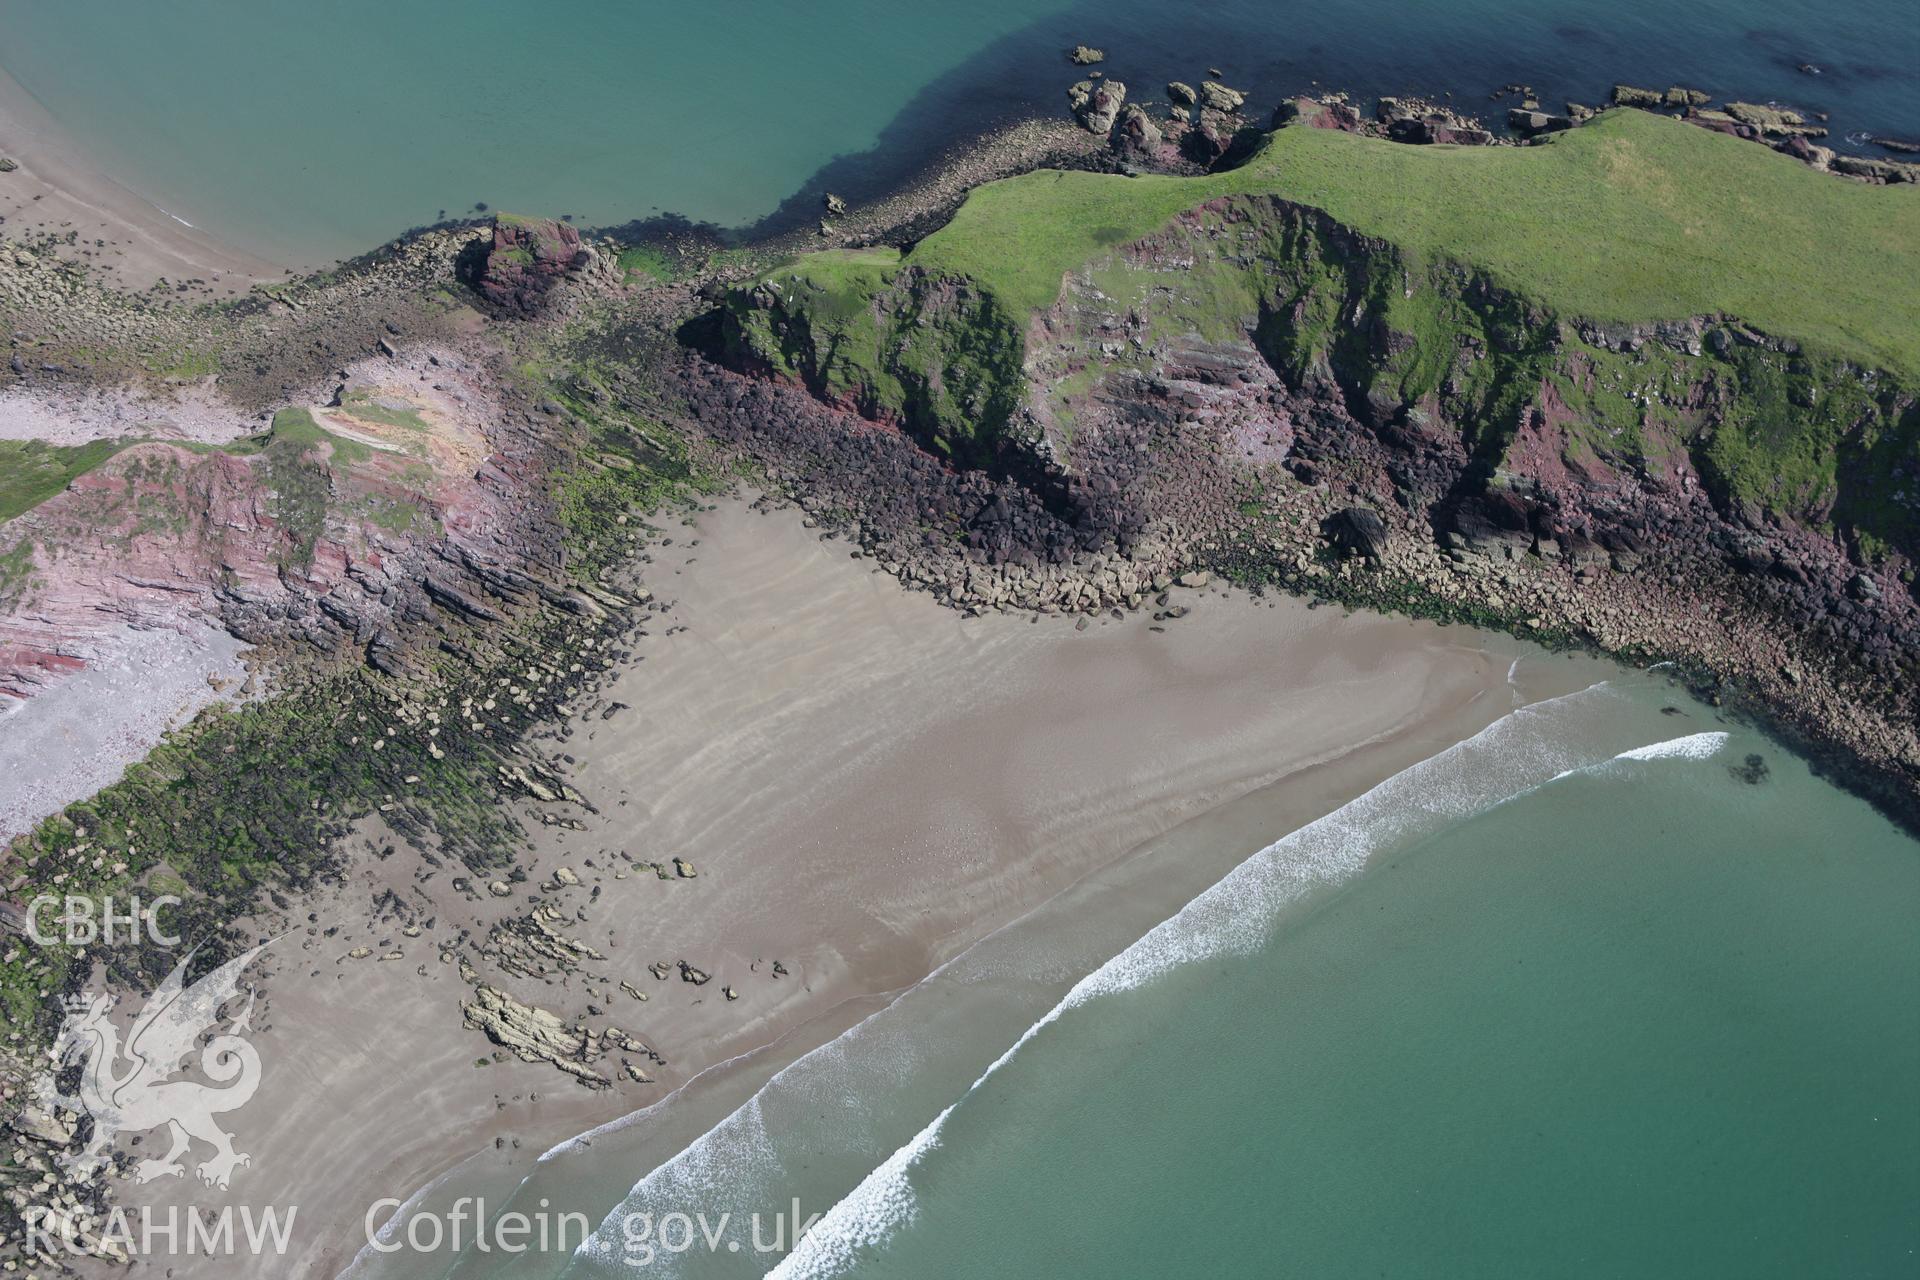 RCAHMW colour oblique photograph of Gateholm Island. Taken by Toby Driver on 01/08/2007.